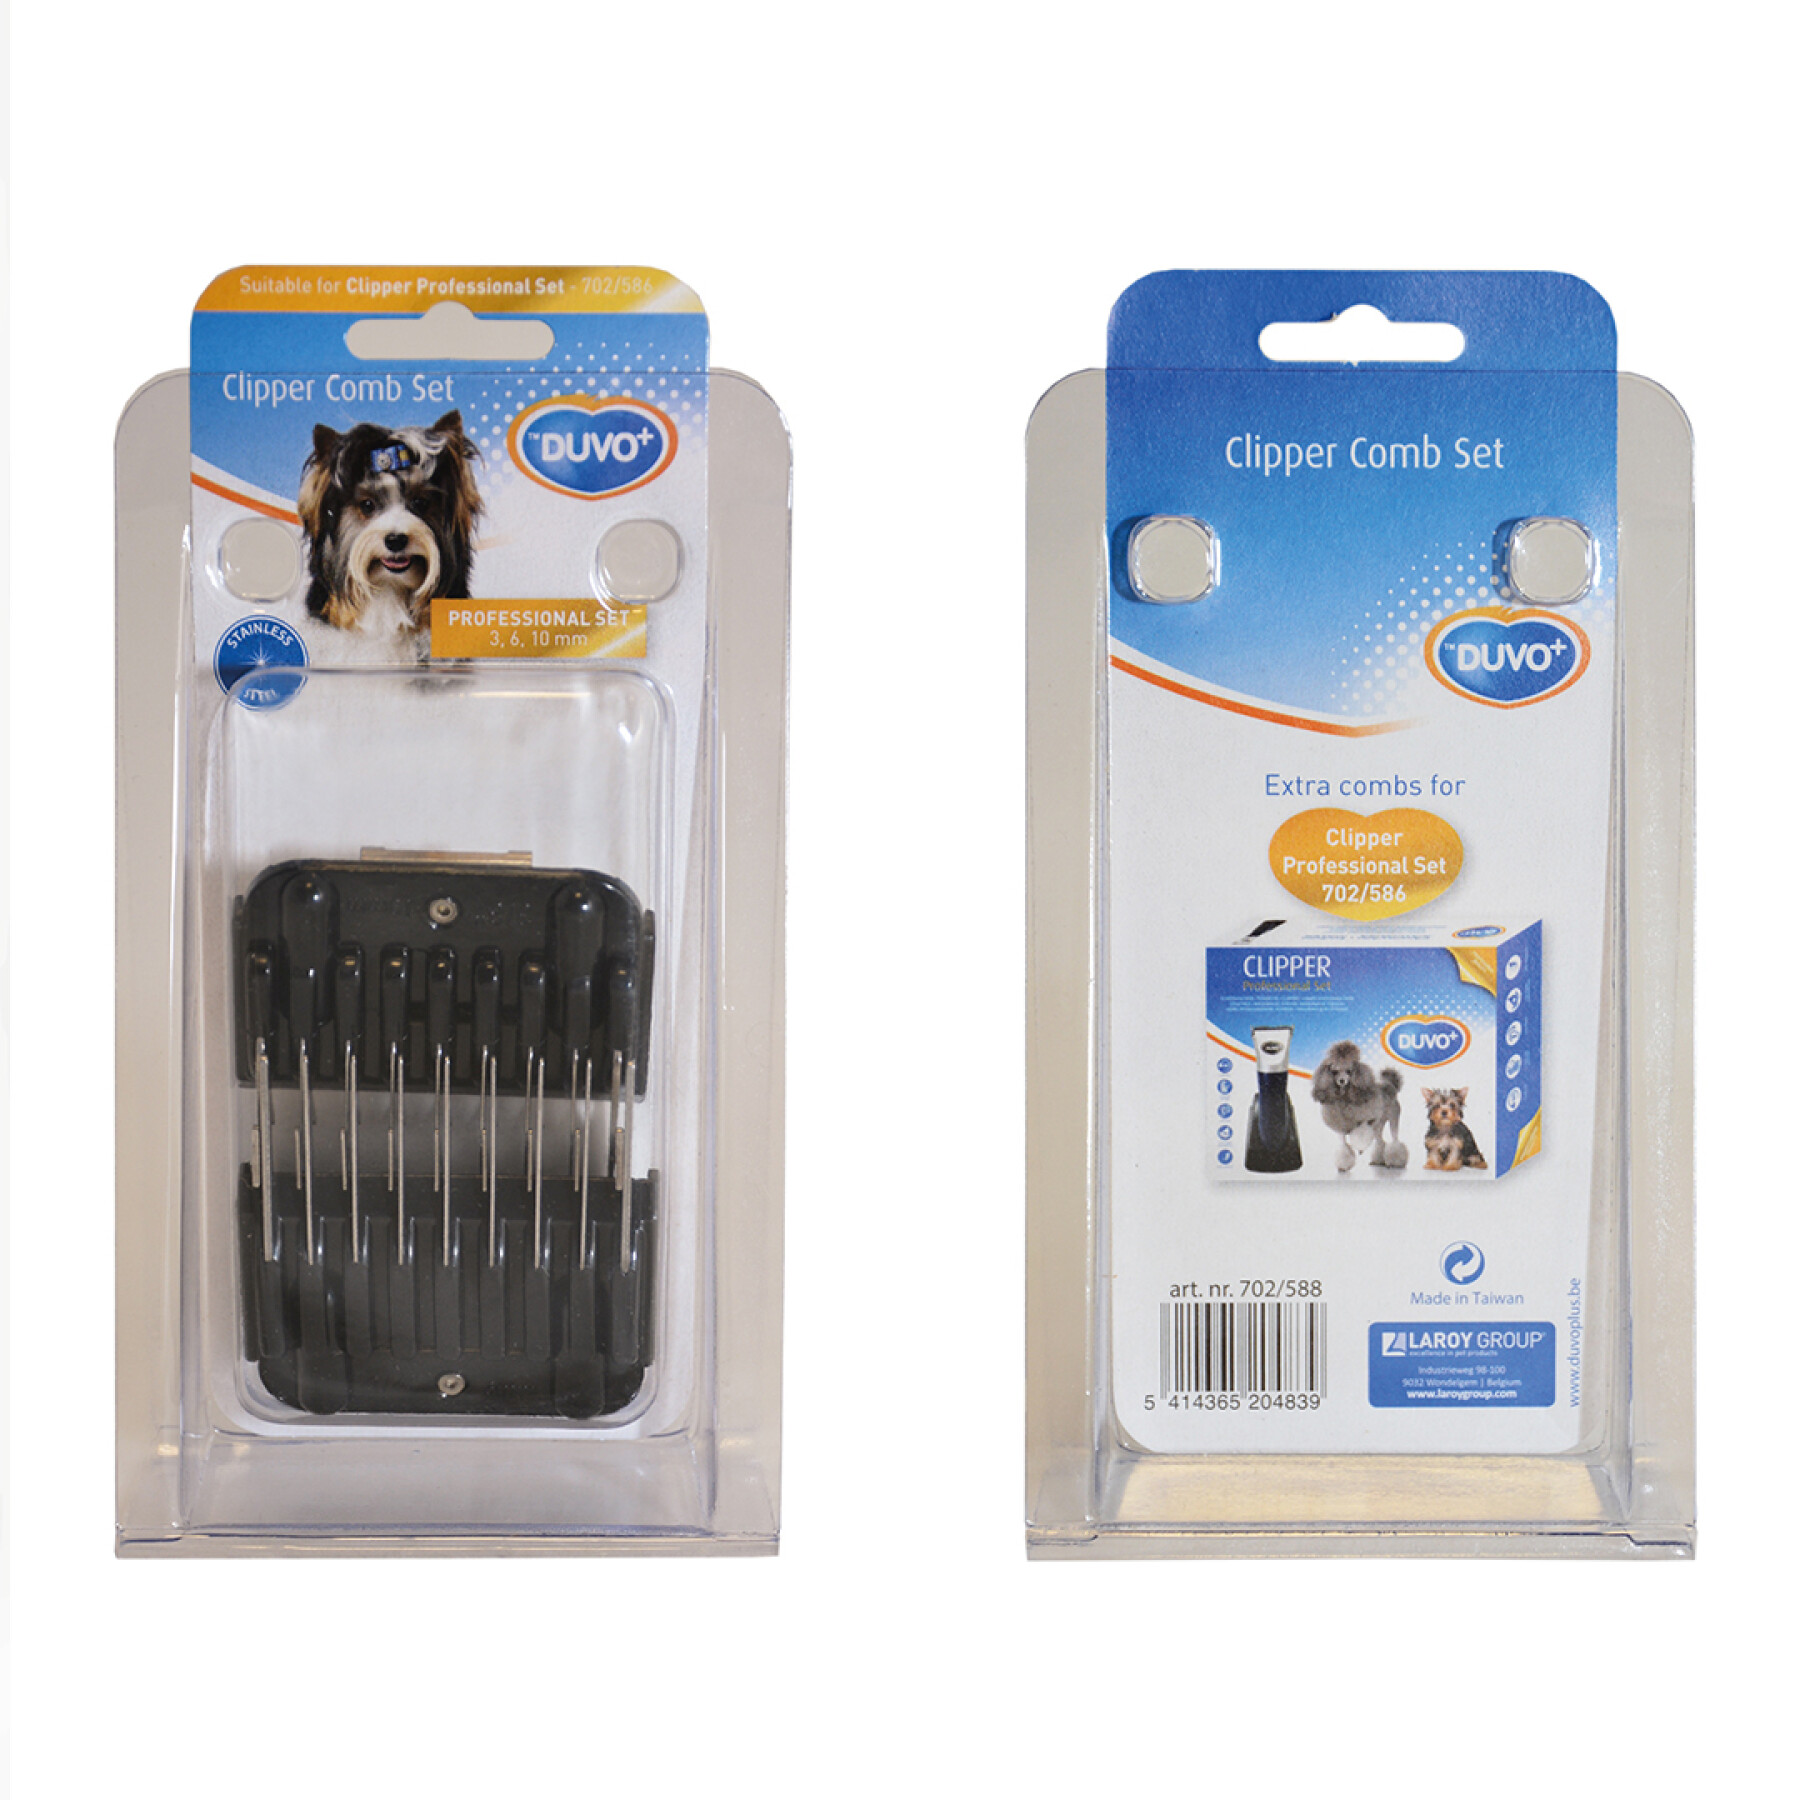 Comb for dog clippers Duvoplus Prof